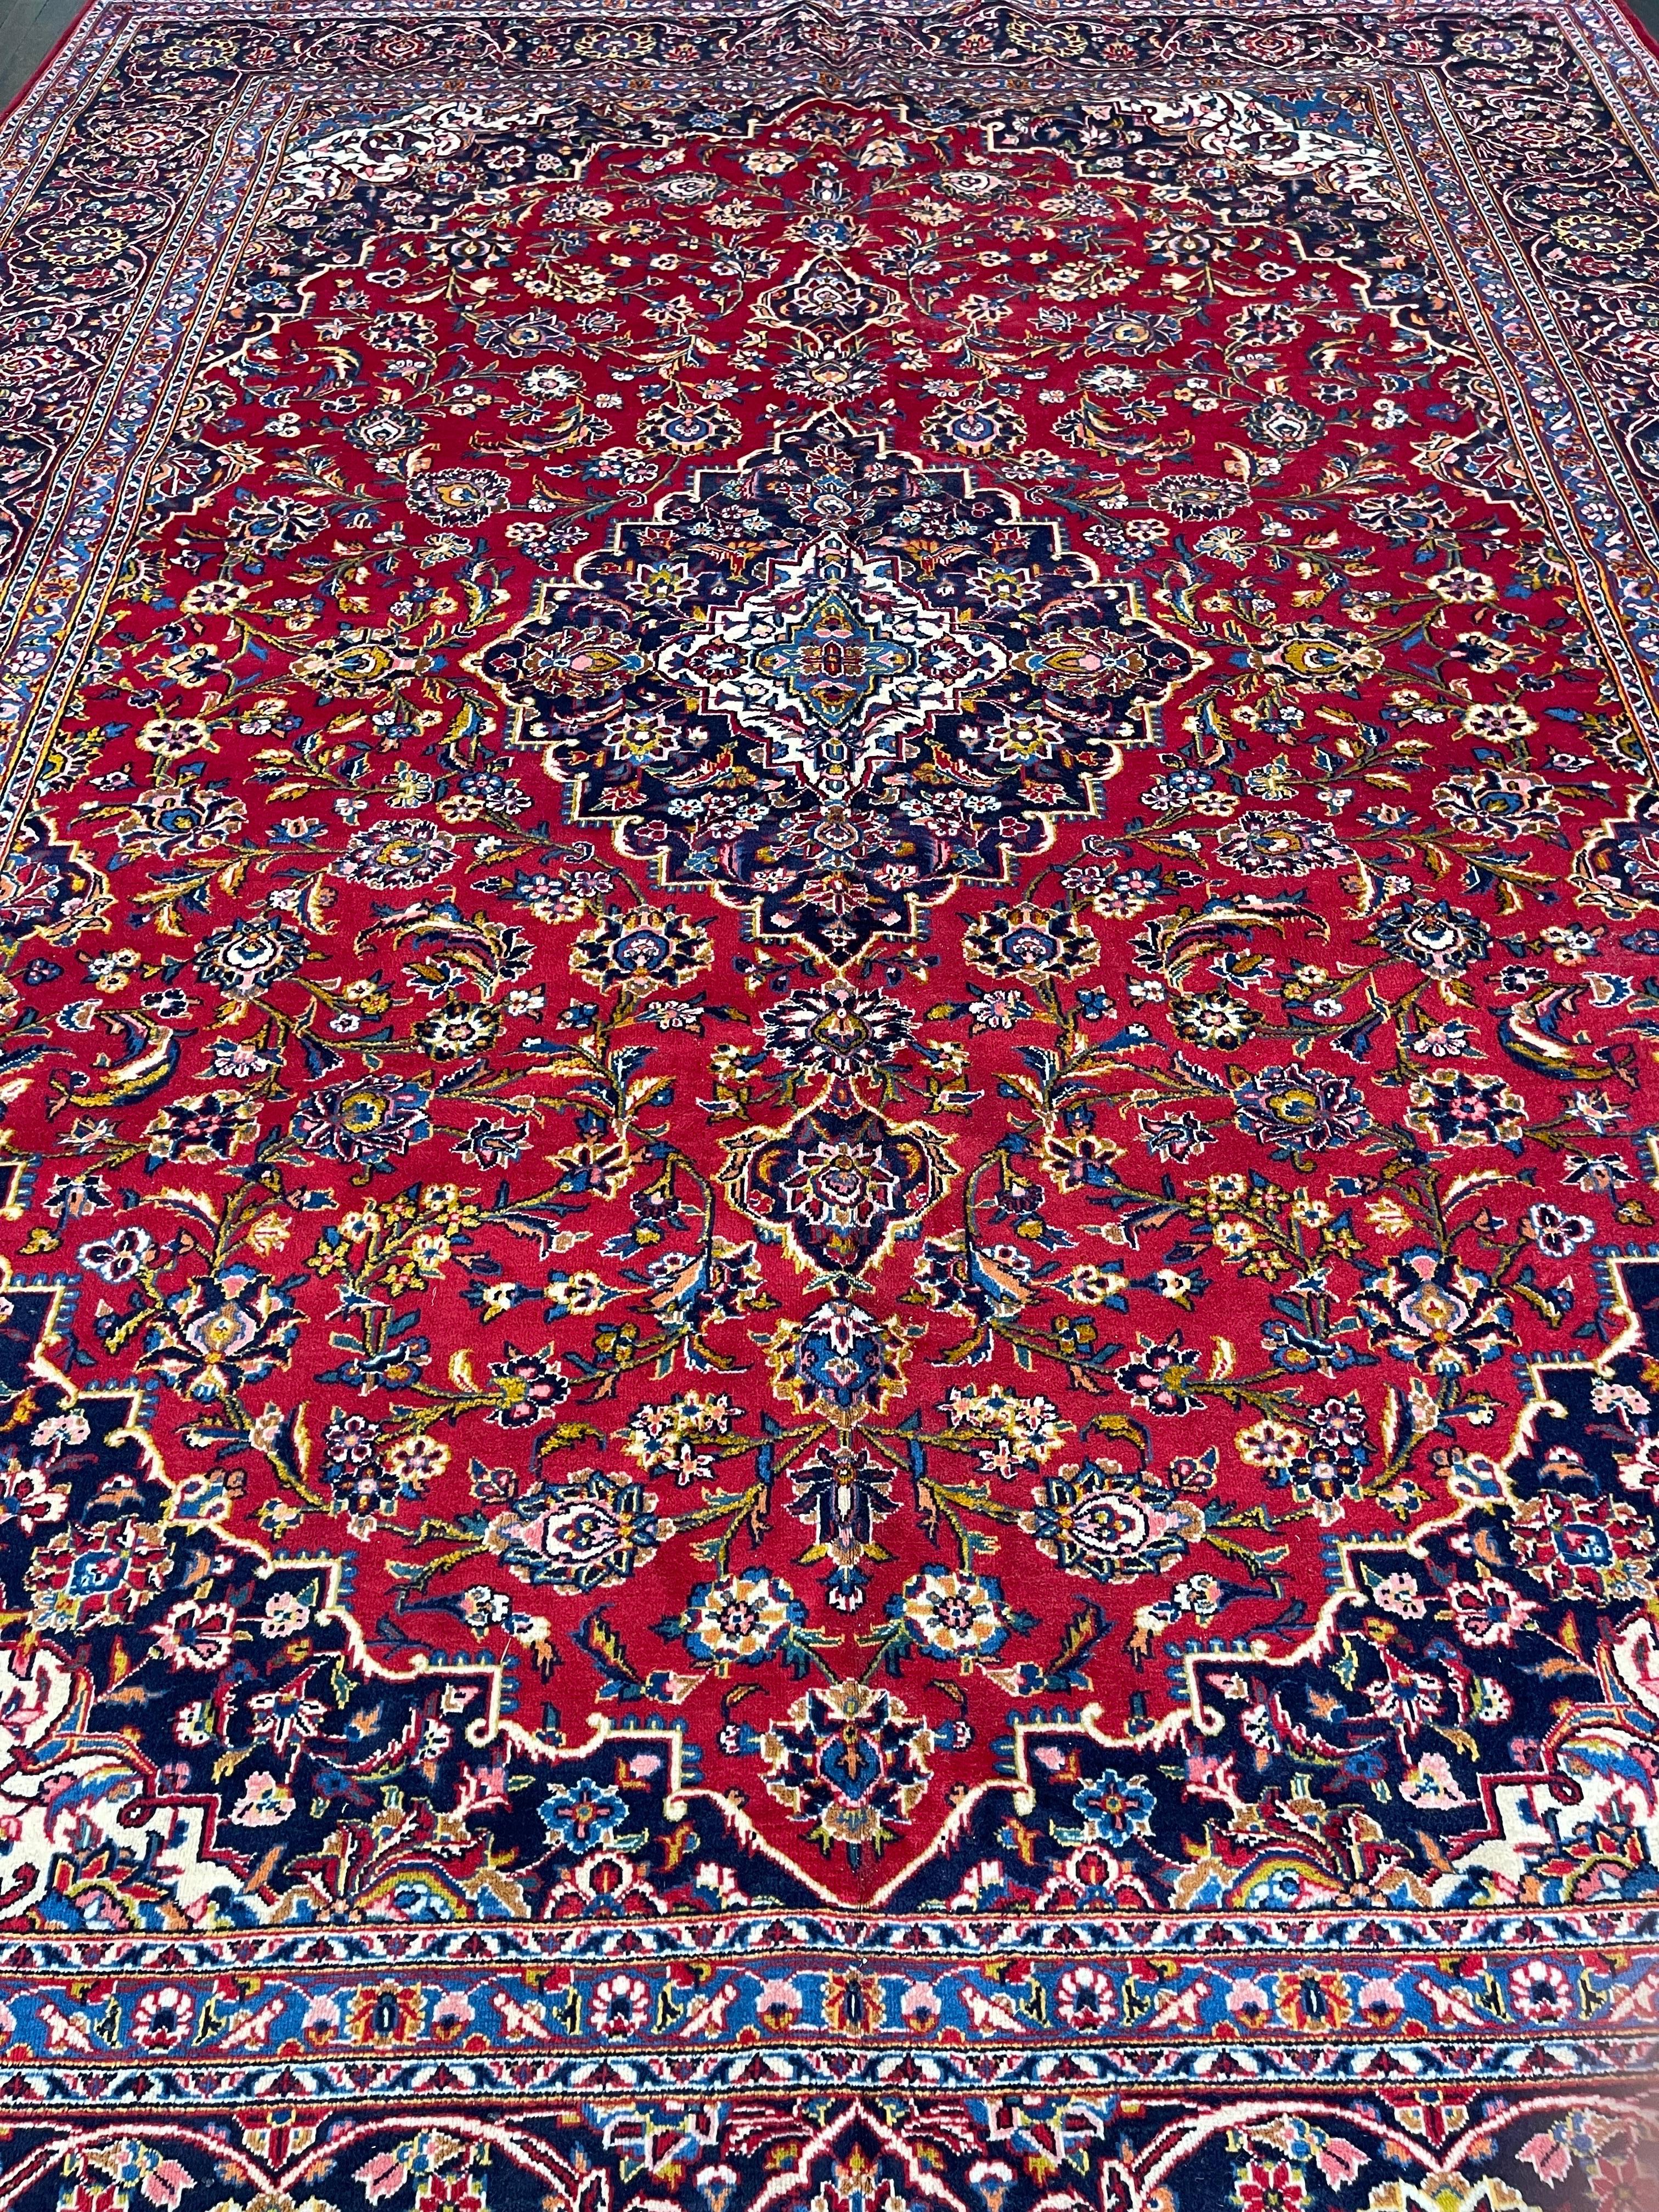 A fine persian carpet hand knotted in one of the major centers of rug making in Iran,this Kashan features a tomato red field decorated with flowers and leaves.The rug is designed with a navy blue medallion and surrounded with a indigo blue